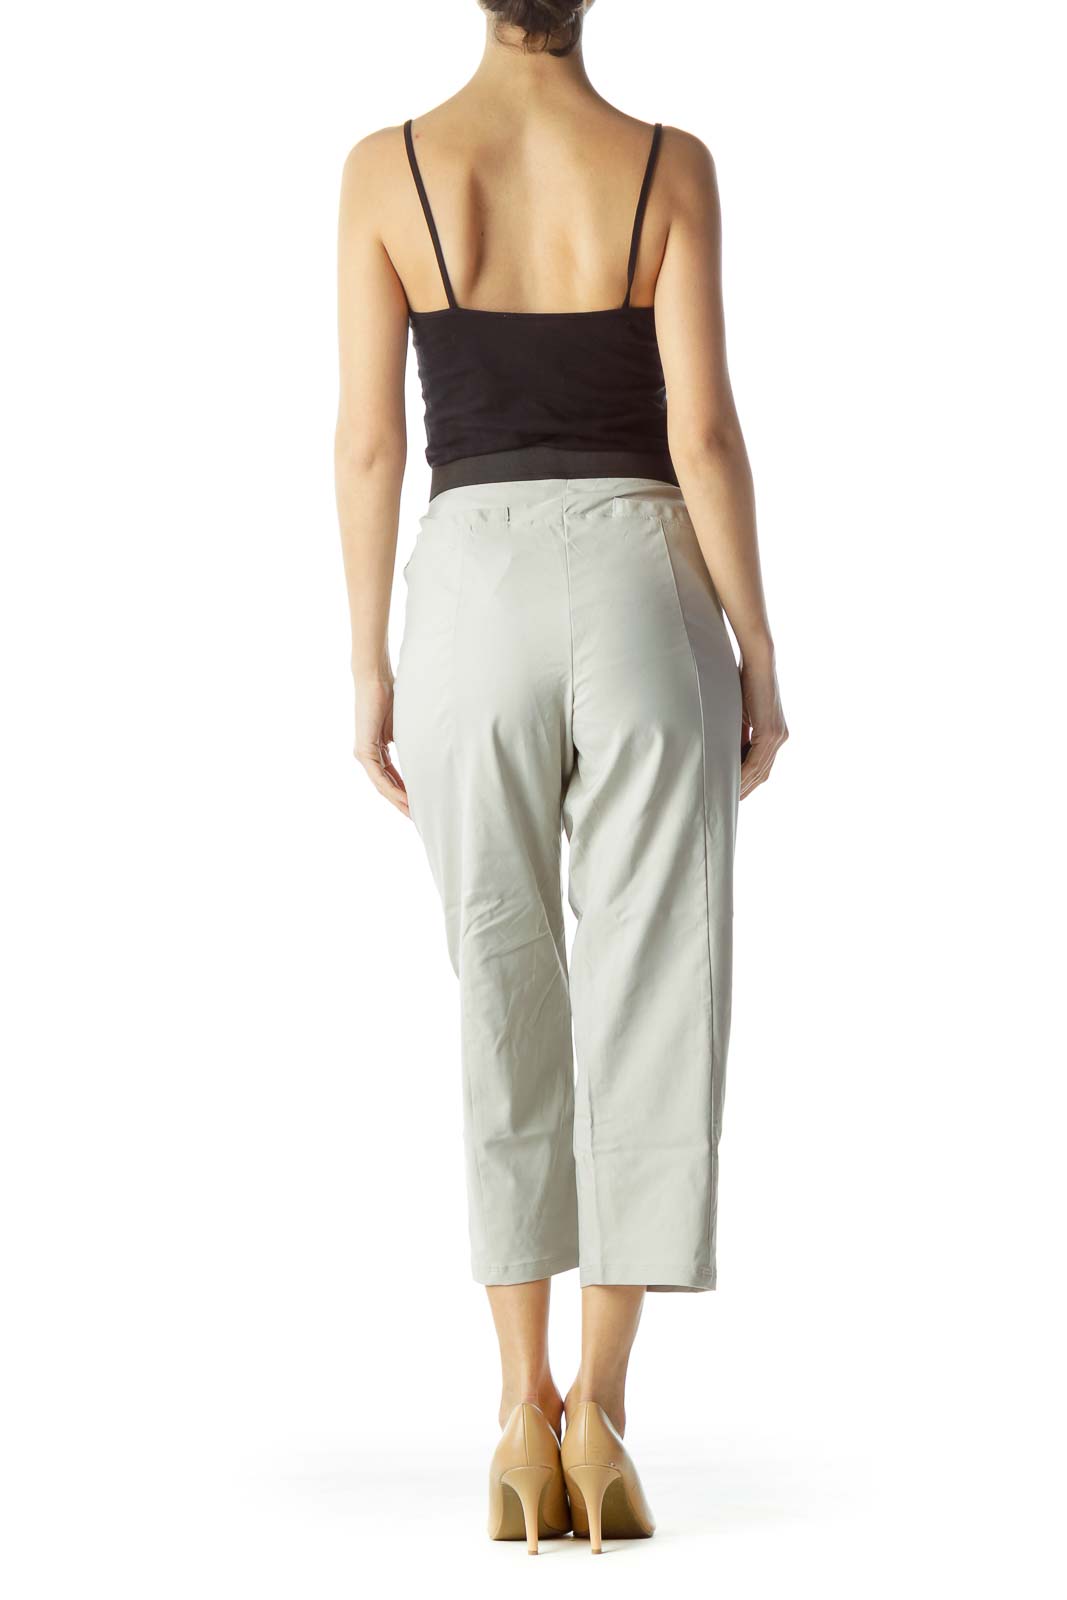 Simply Vera Vera Wang stretch pull on pants. Come in navy, purple